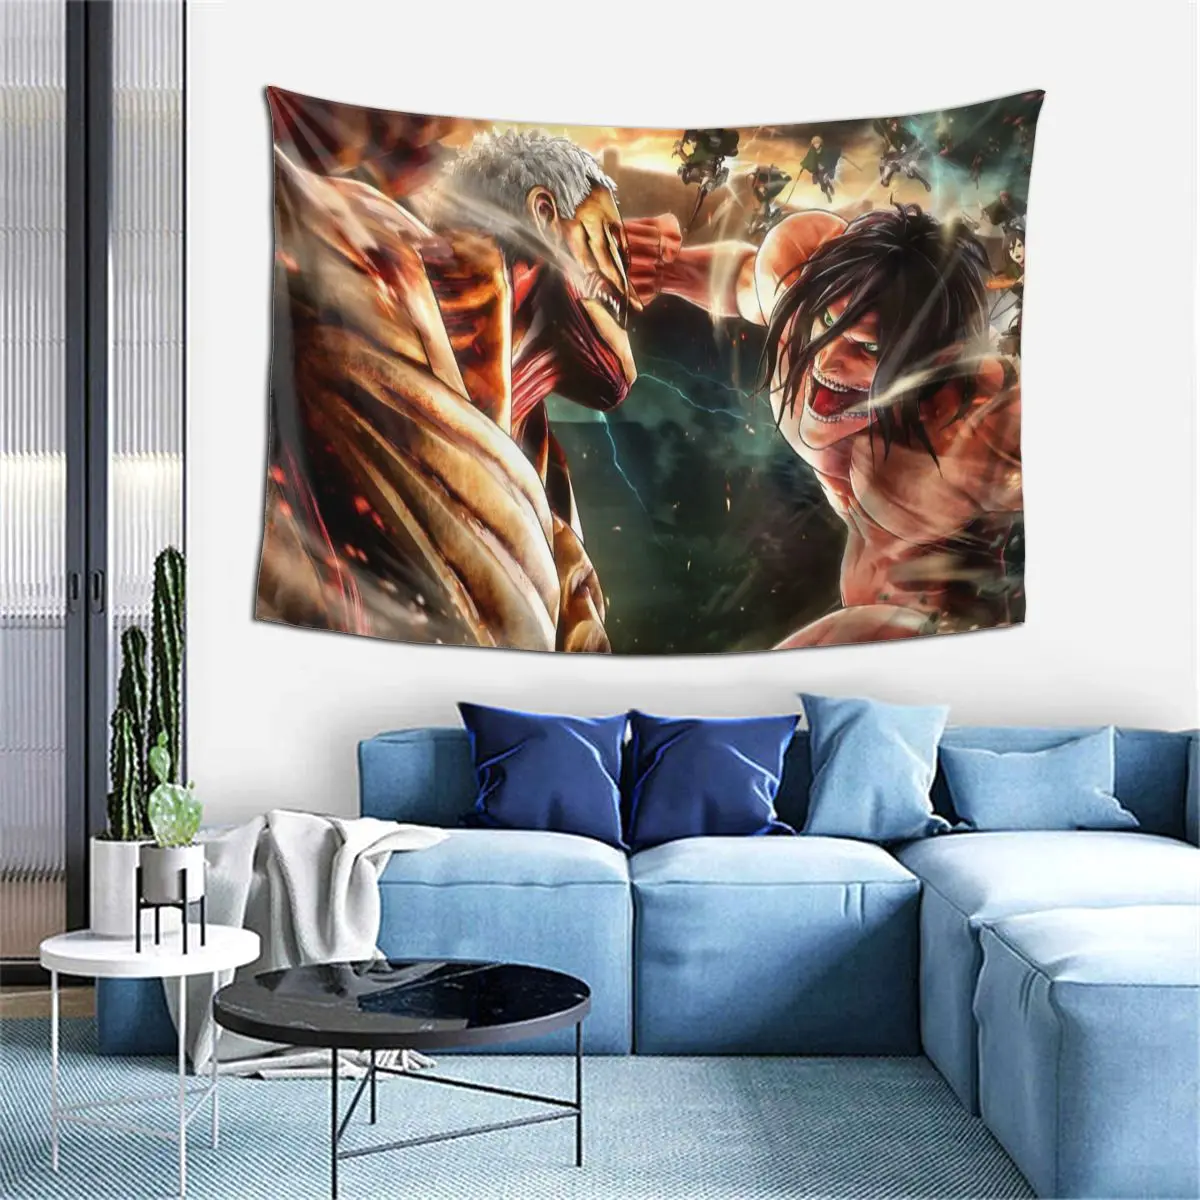 

Attack On Titan SnK Anime Tapestry Levi Wall Arts Decor Home Hanging Cloth Background Covering Aesthetic